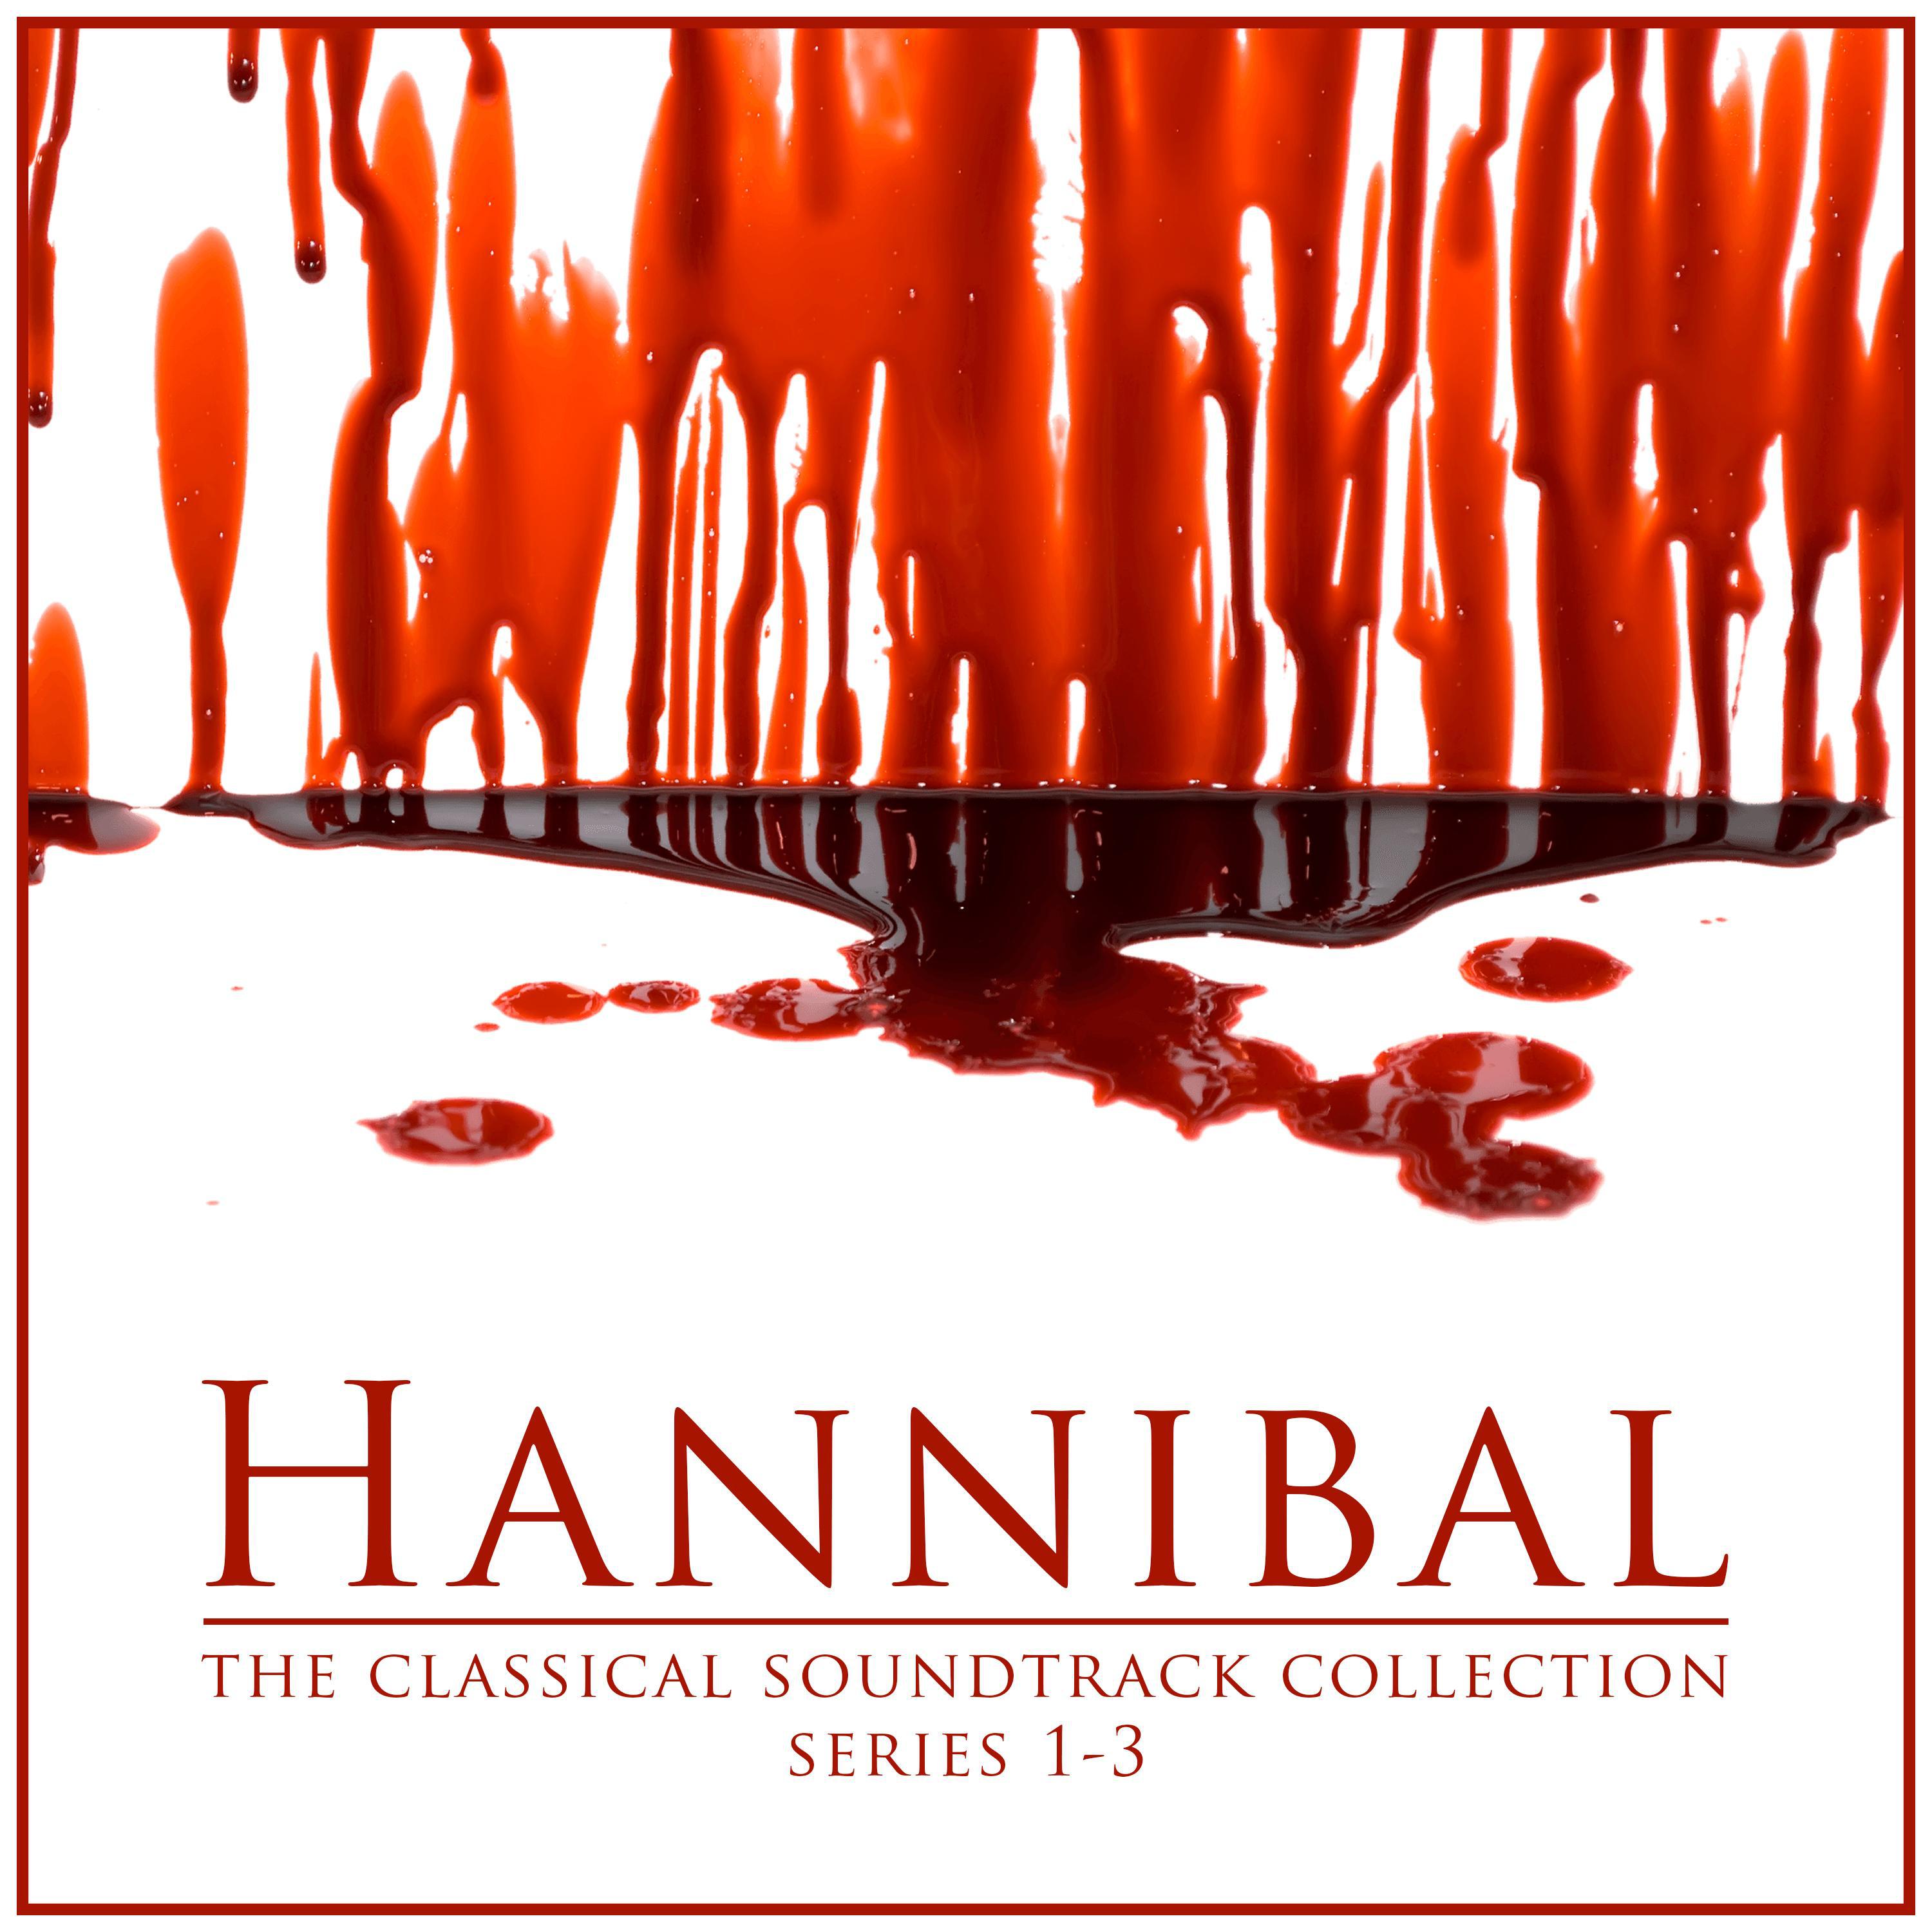 Hannibal - The Classical Soundtrack Collection Series 1-3